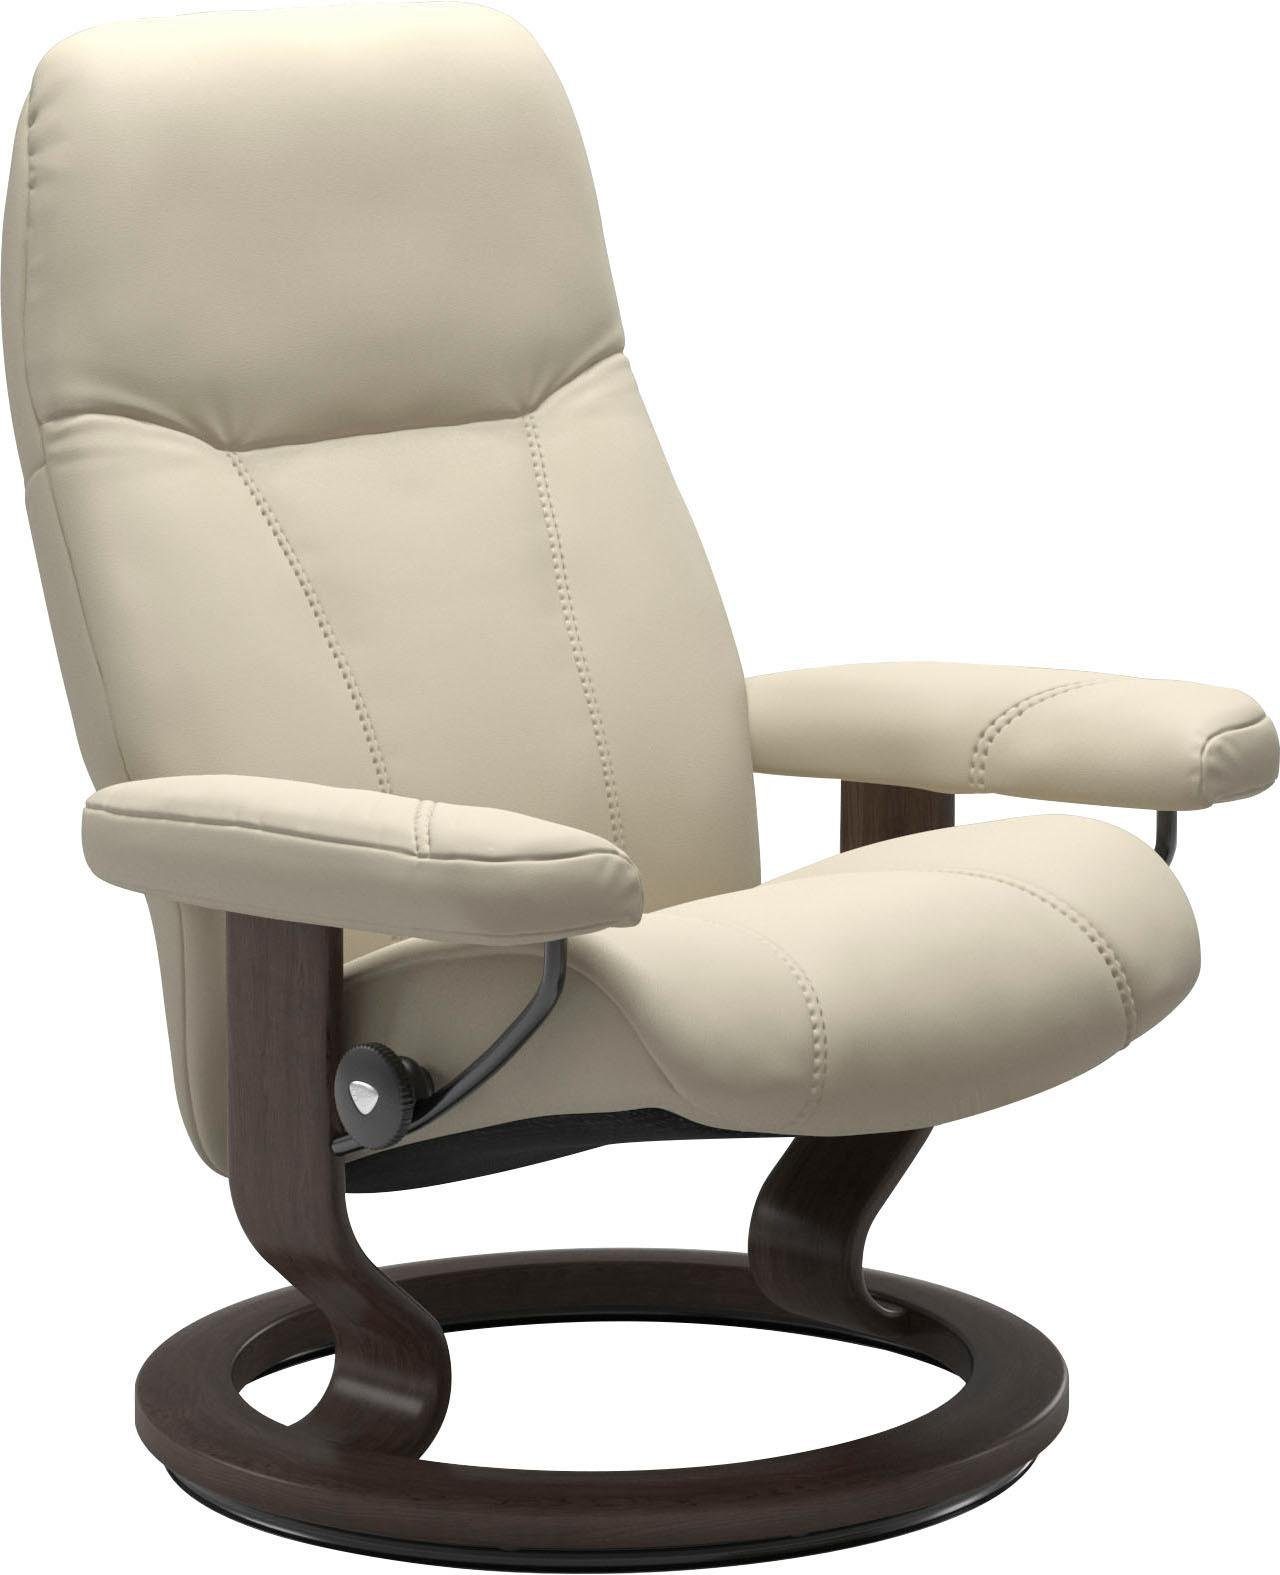 Gestell Classic Wenge Größe M, Relaxsessel Consul, Stressless® Base, mit